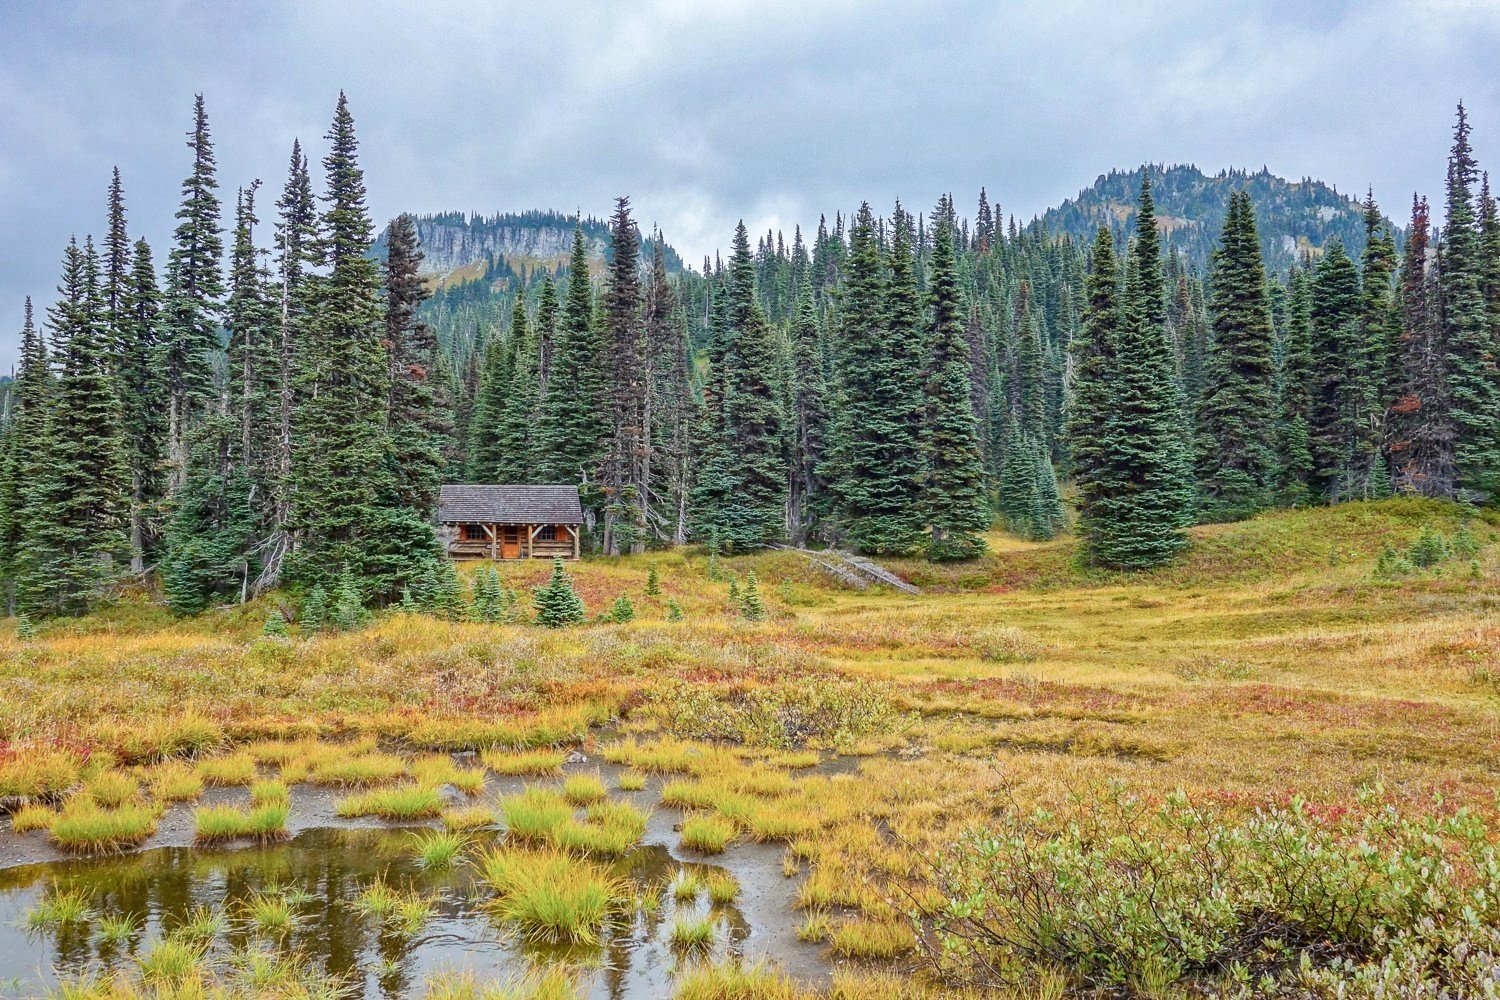 A rustic cabin in front of a boggy meadow on the Wonderland Trail.